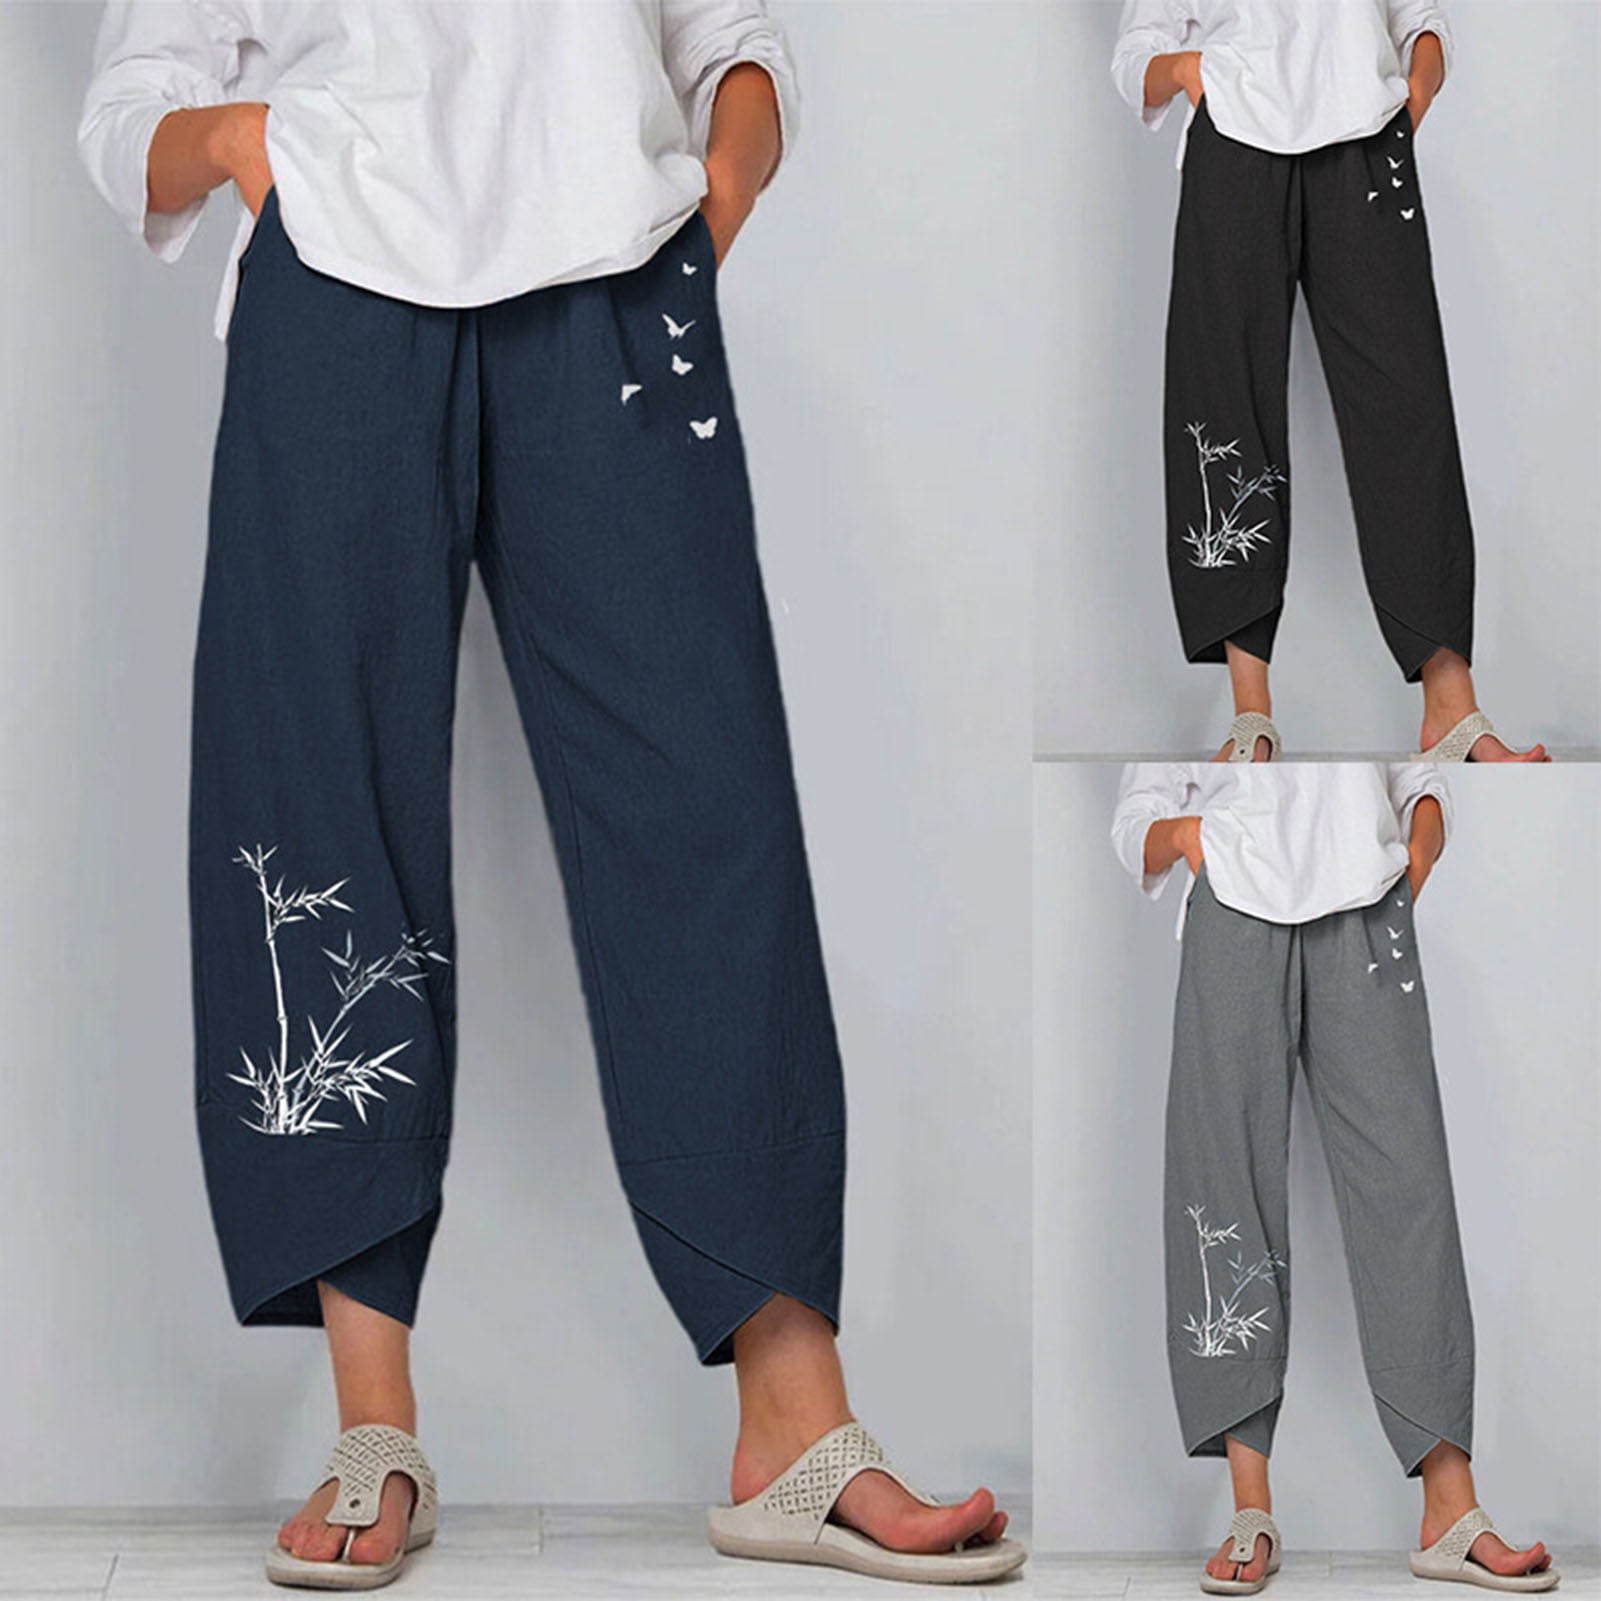 Try These Bamboo Harem Pants For Every Body Shape  Siddhiwear